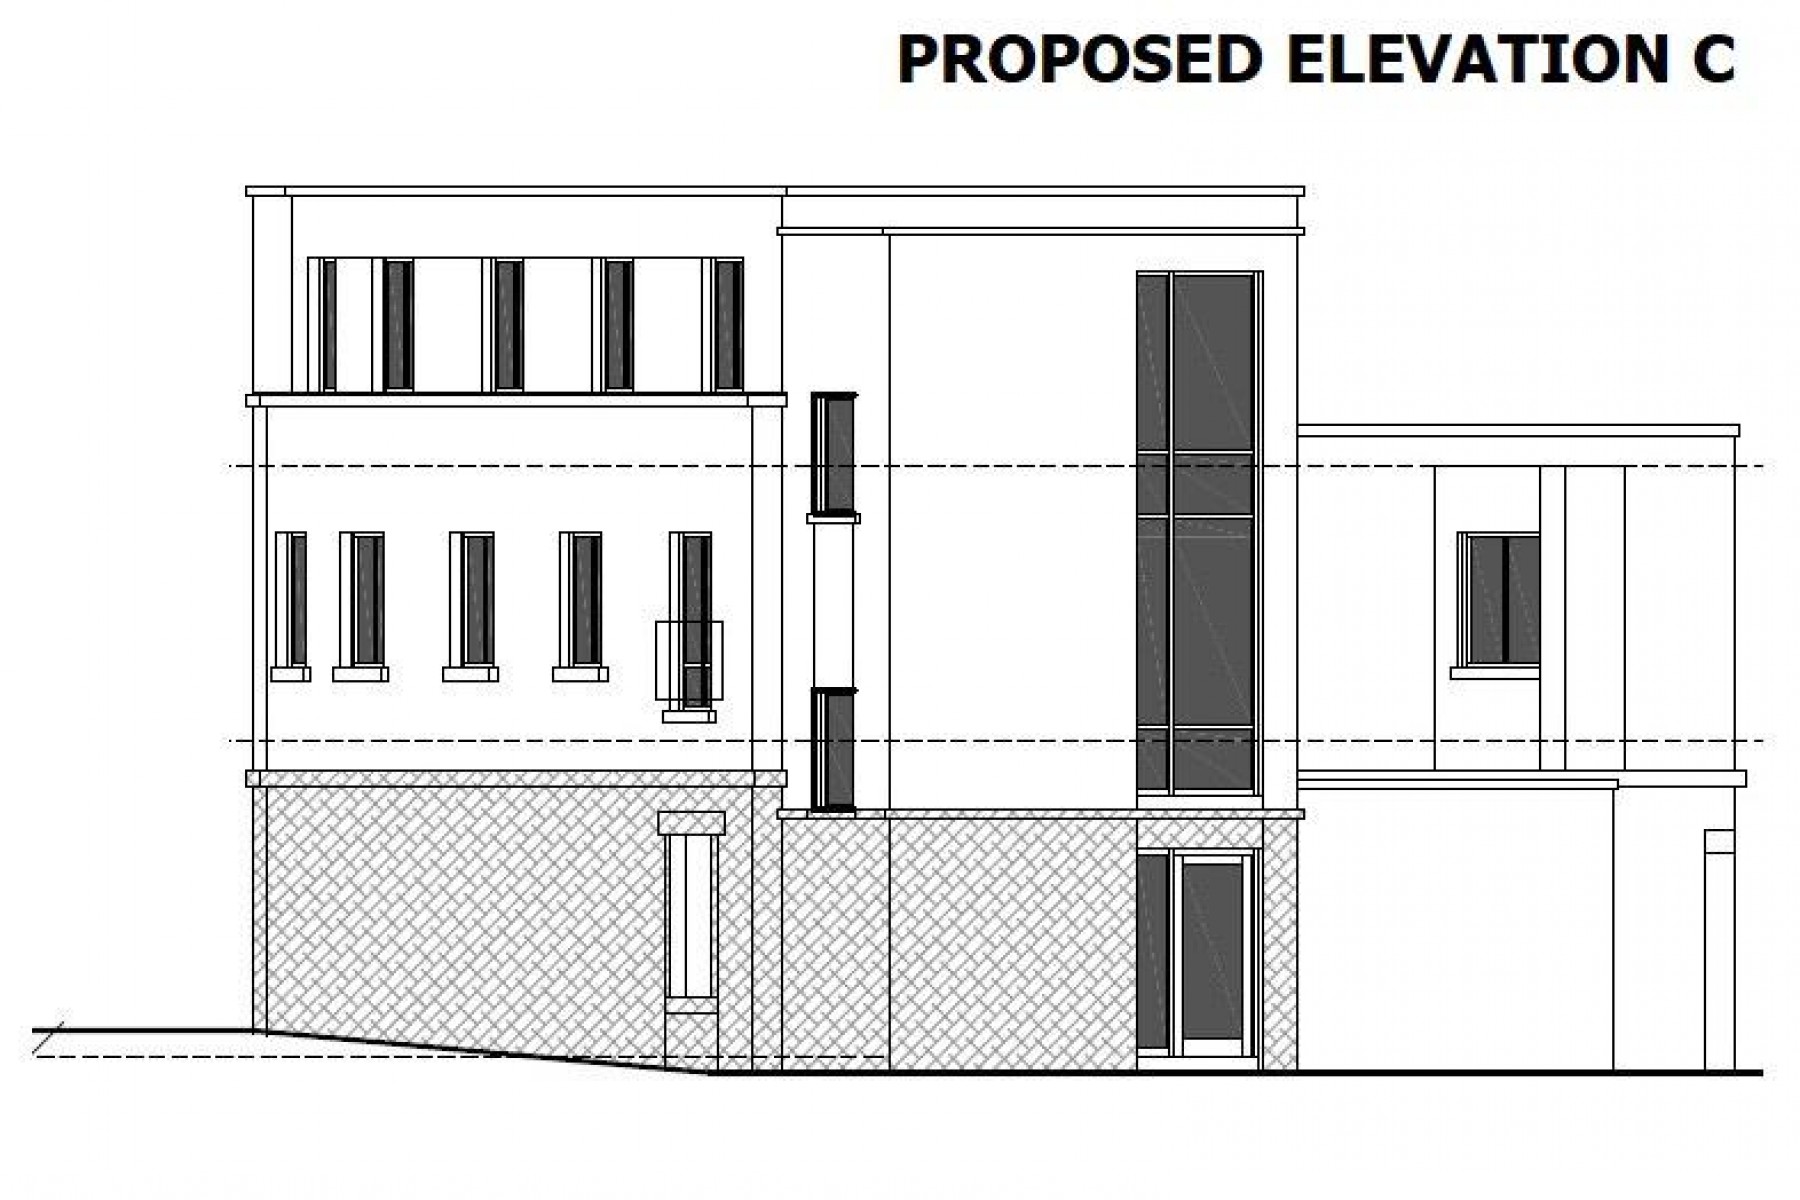 Images for PP GRANTED 5 FLATS - GDV £900K